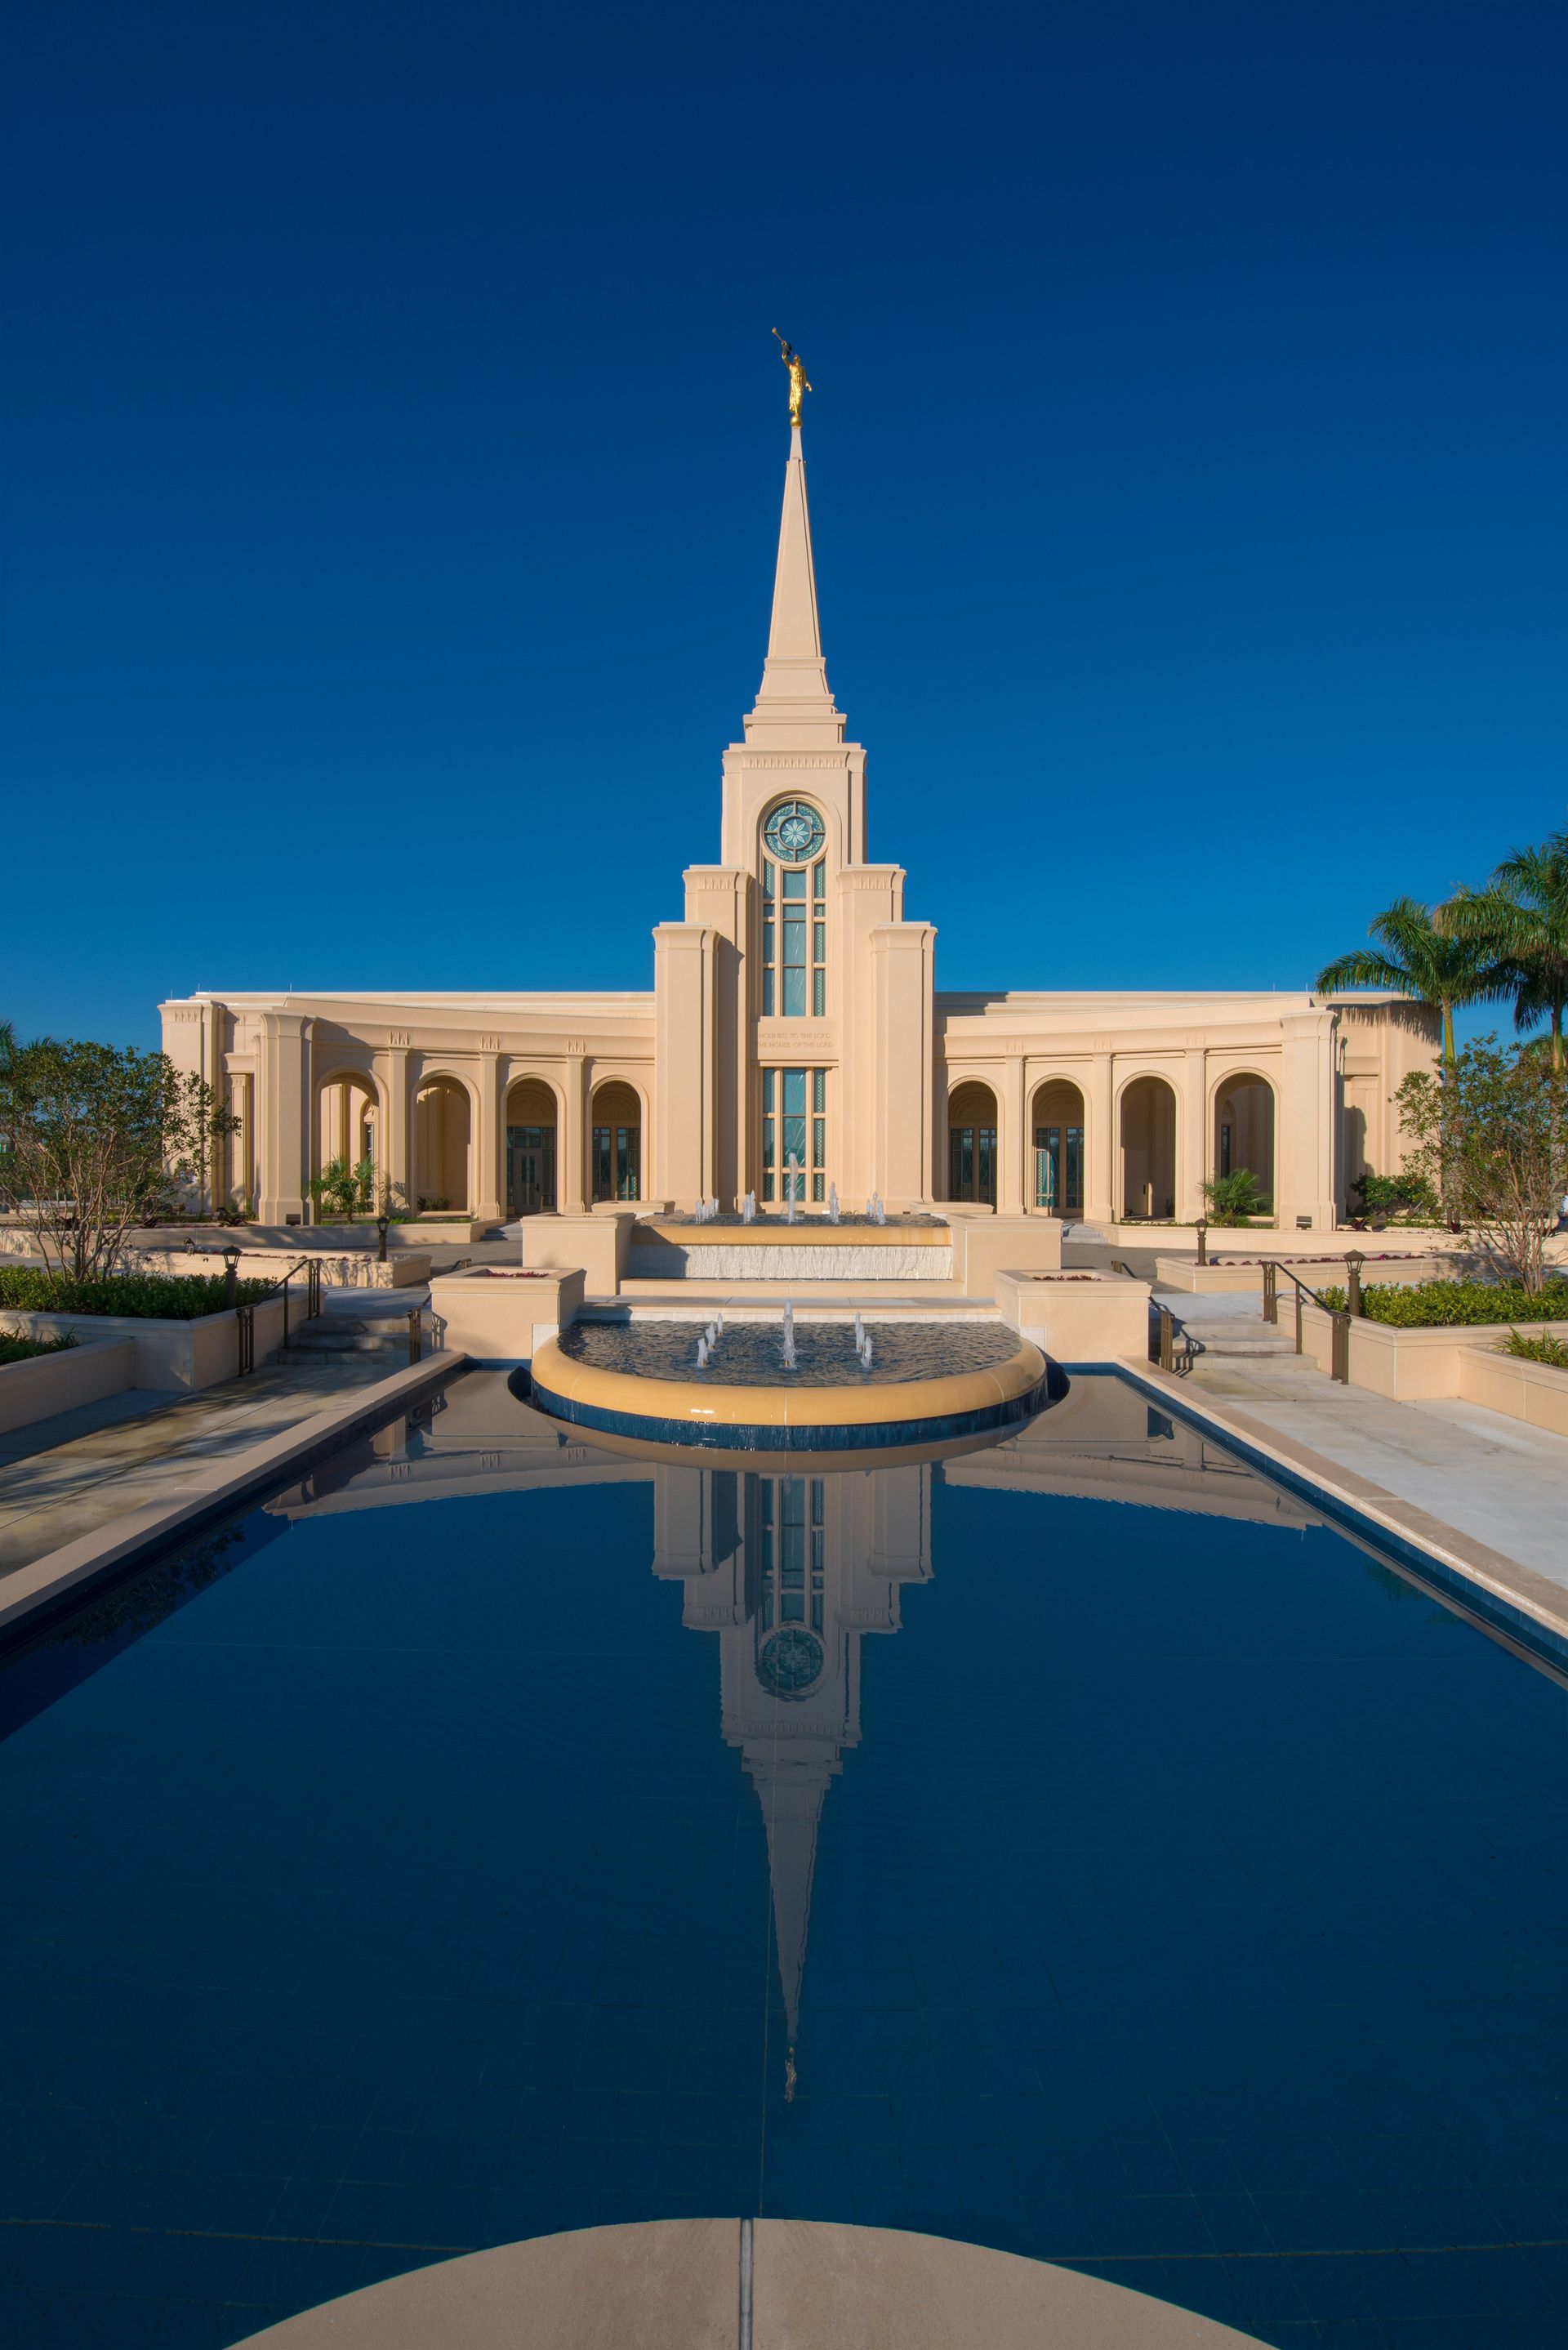 A reflection pool on the grounds of the Fort Lauderdale Florida Temple.